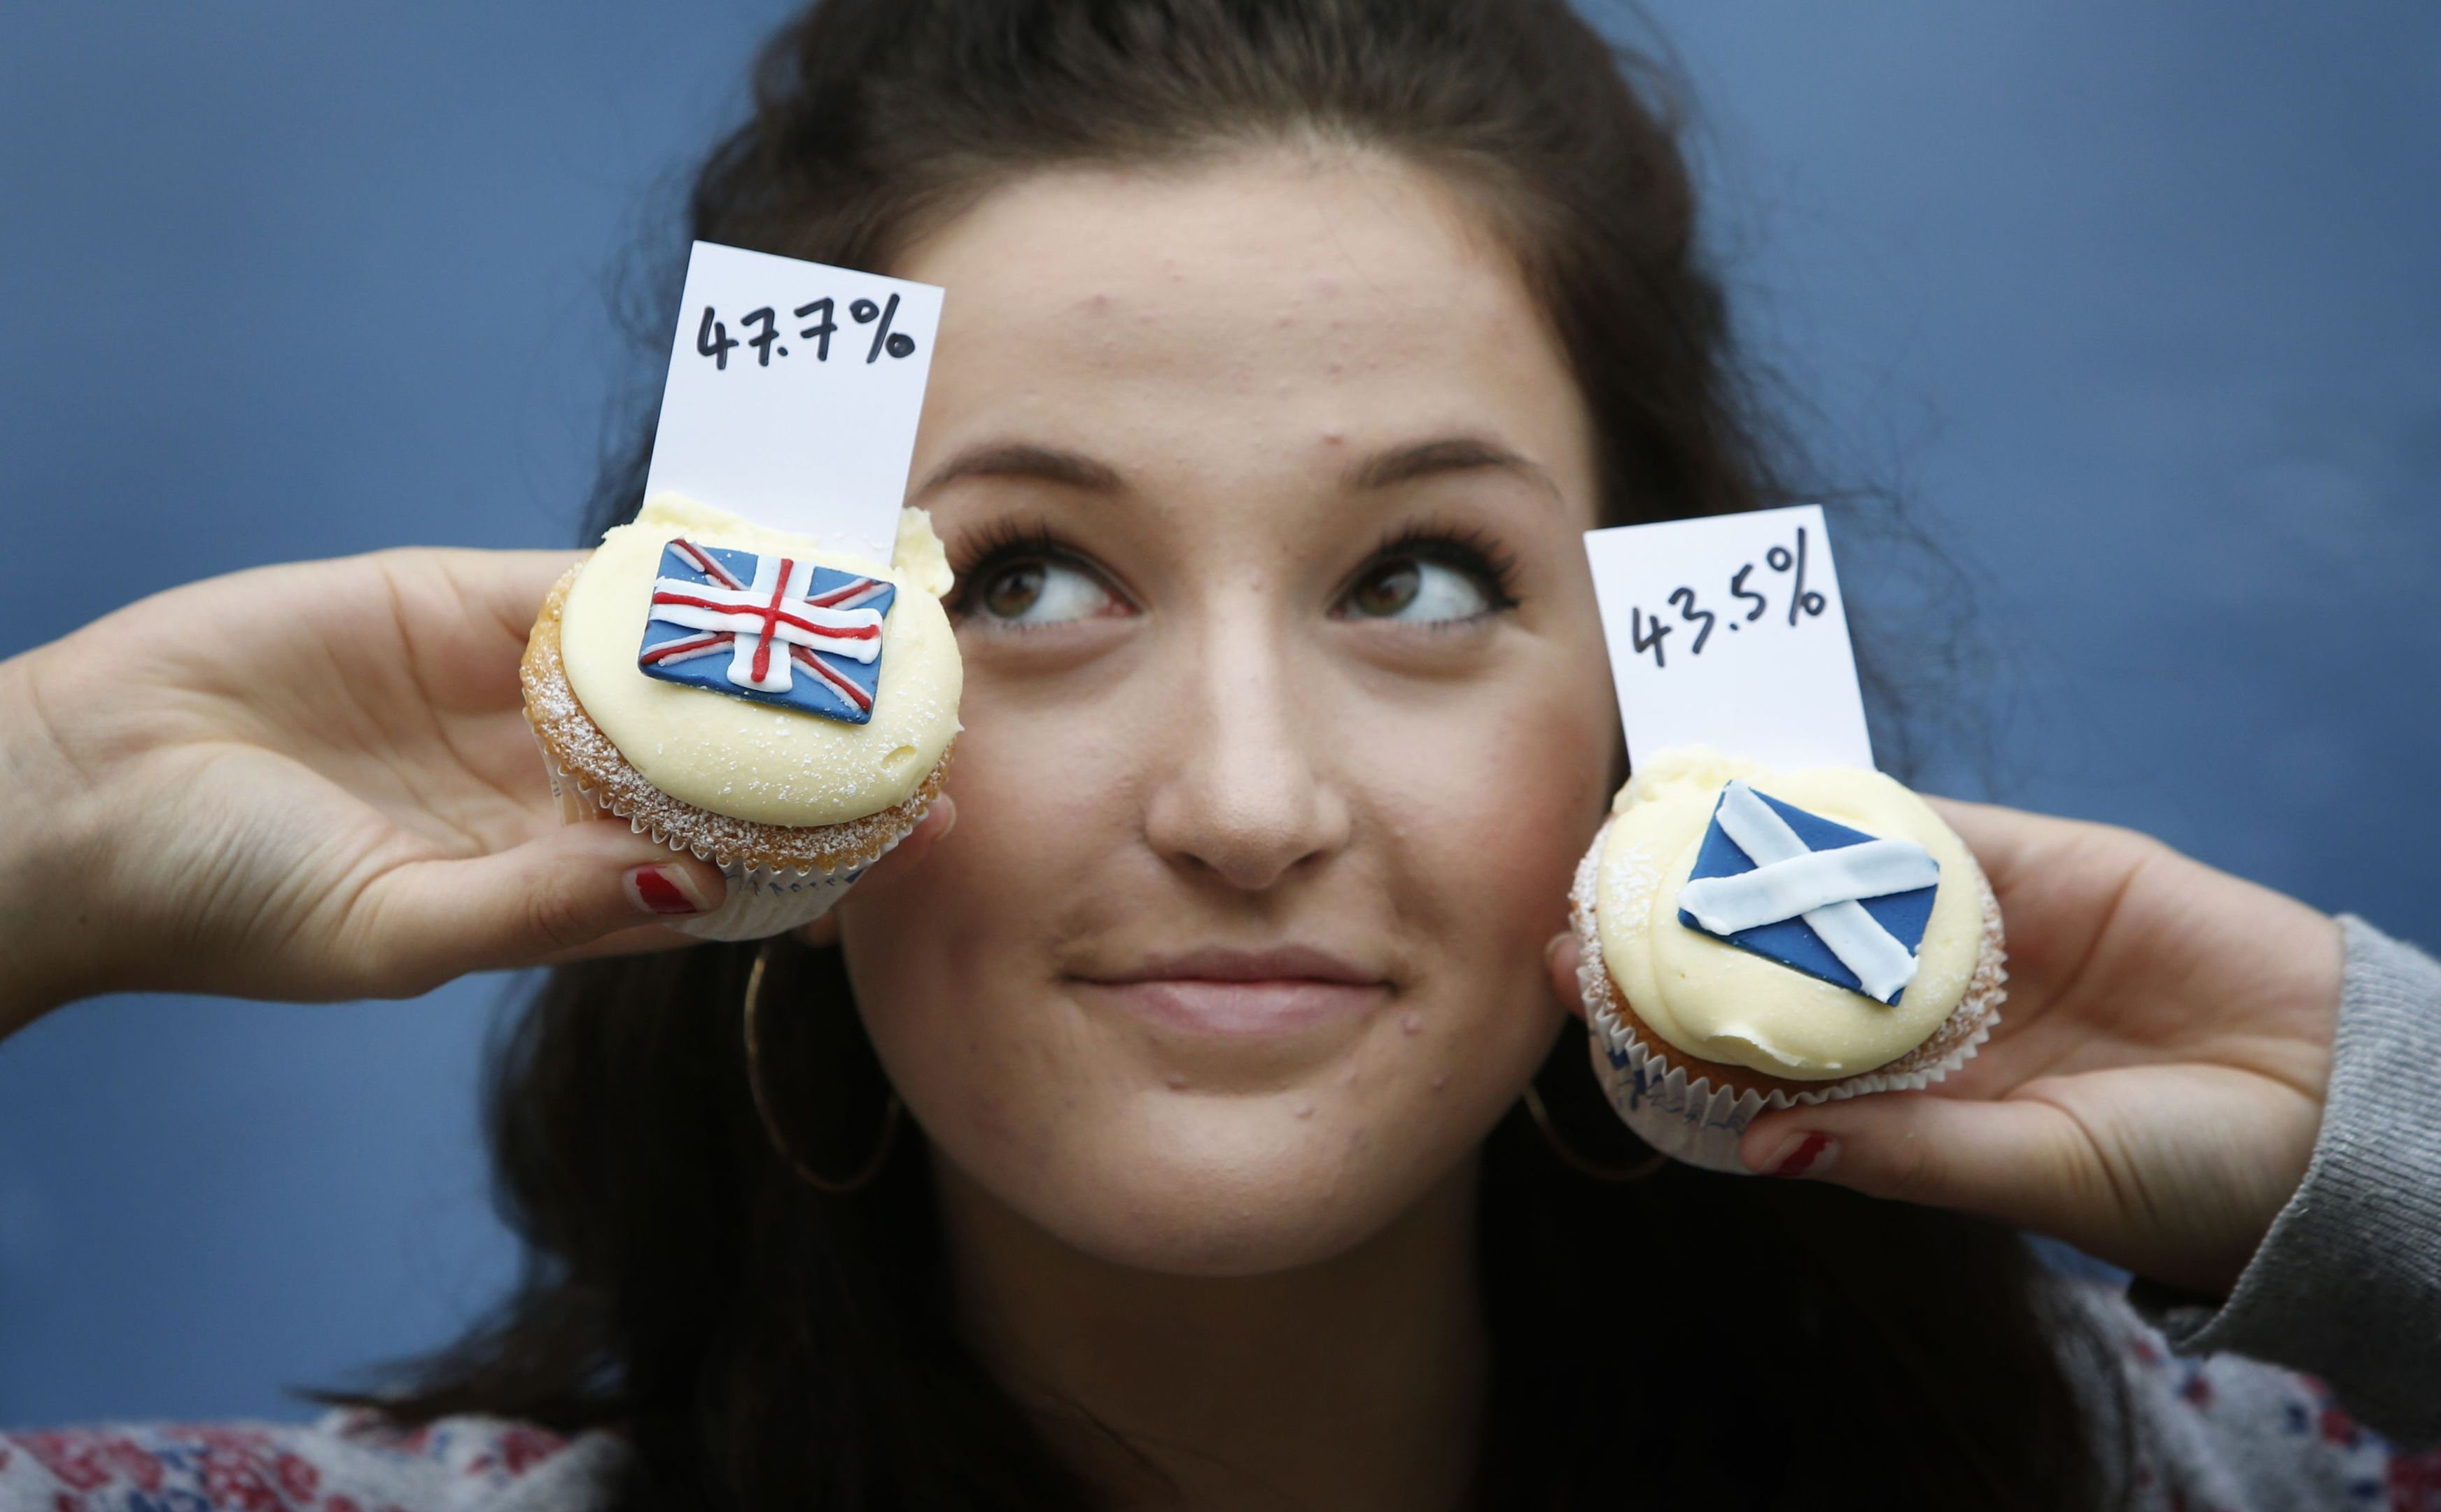 Pippa Perriam holds cupcakes at Edinburgh bakery Cuckoo's that show the results of their cupcake referendum opinion poll survey where the public could buy a Yes, No or Undecided cupcake during the last independence referendum.